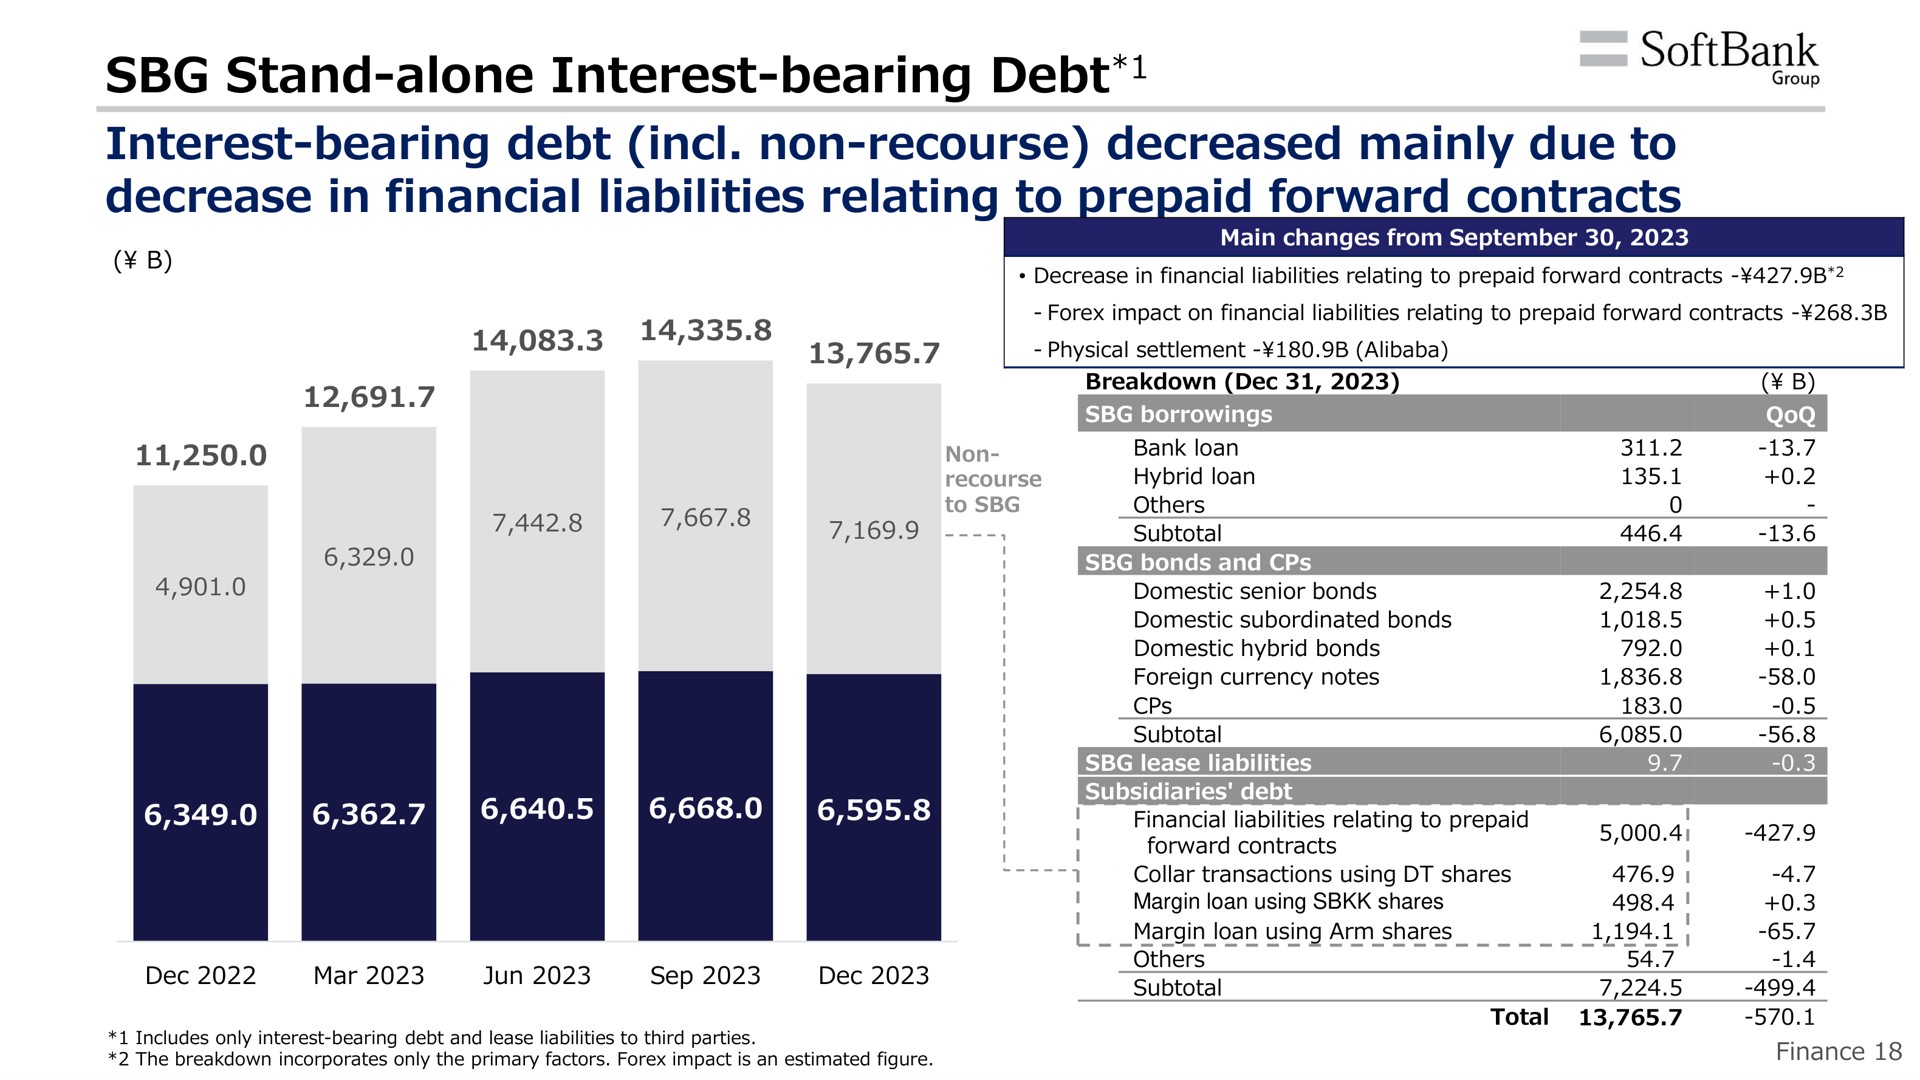 stand alone interest bearing debt interest bearing debt non recourse decreased mainly due to decrease in financial liabilities relating to prepaid forward contracts | SoftBank